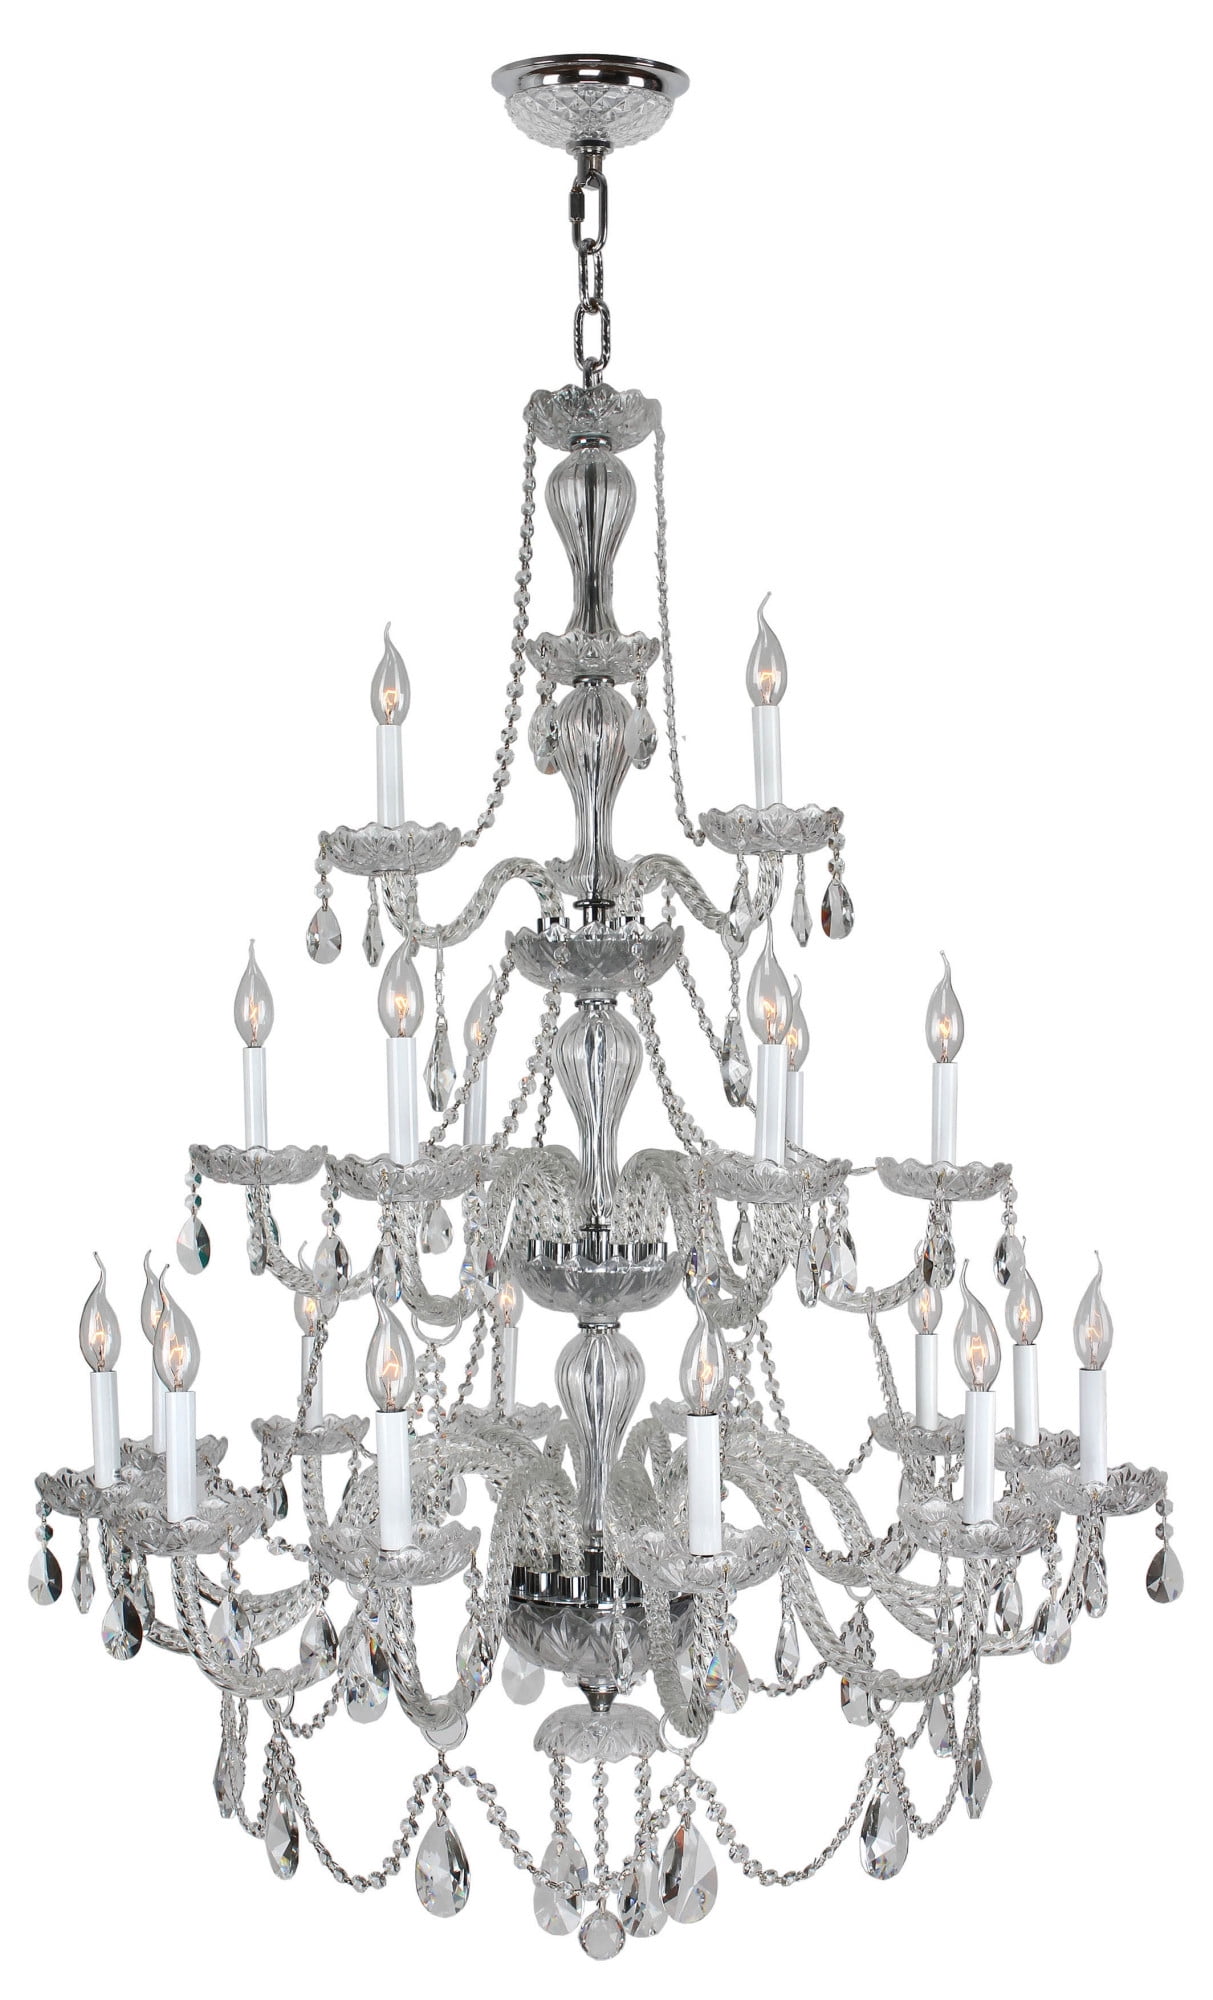 Provence Collection 21 Light Chrome Finish and Clear Crystal Chandelier 38